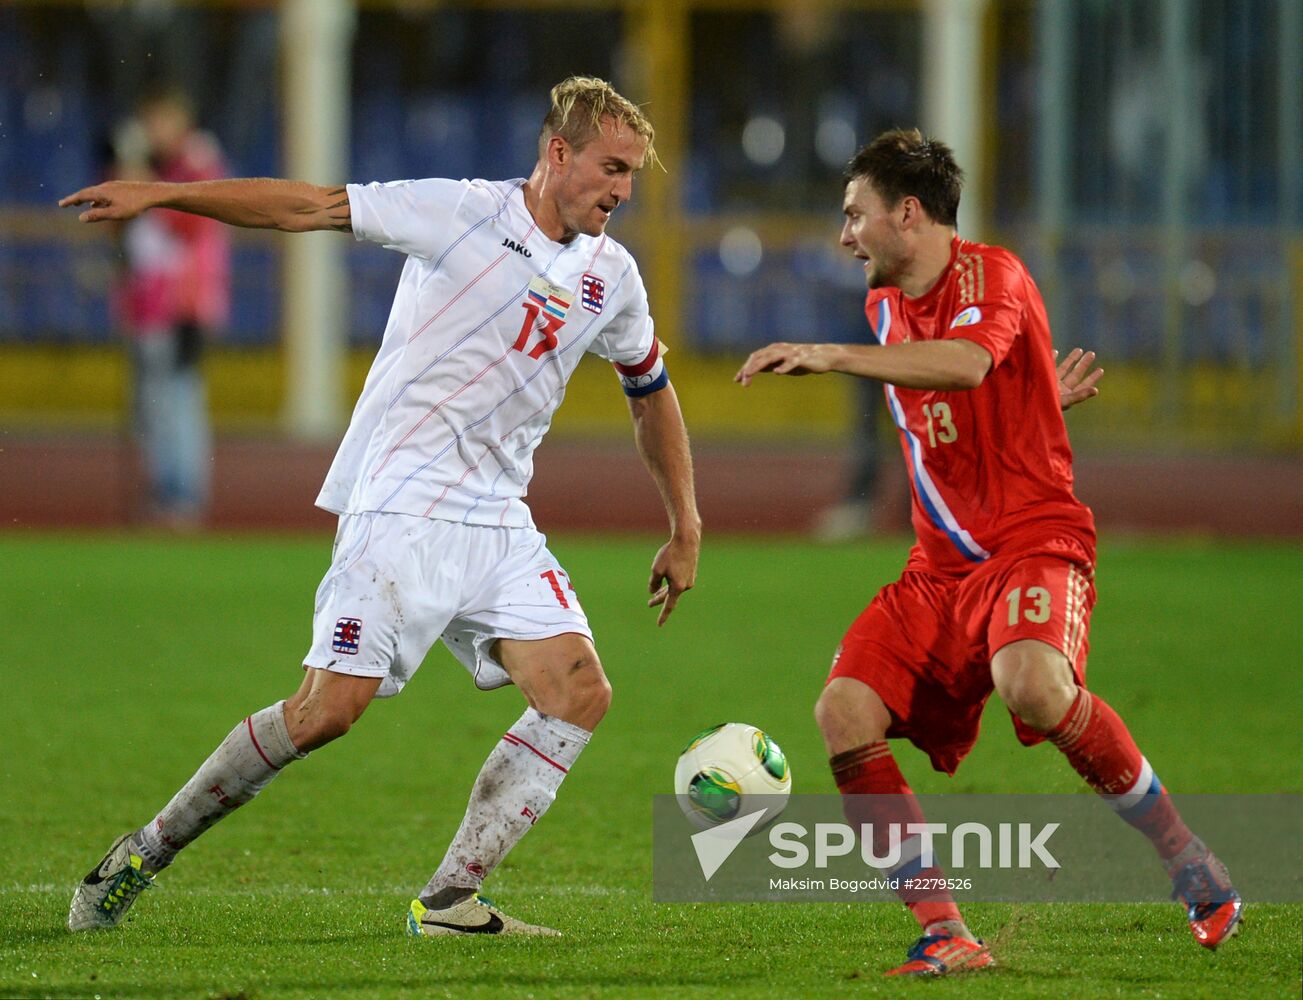 Qualifying match of 2014 FIFA World Cup. Russia vs. Luxembourg